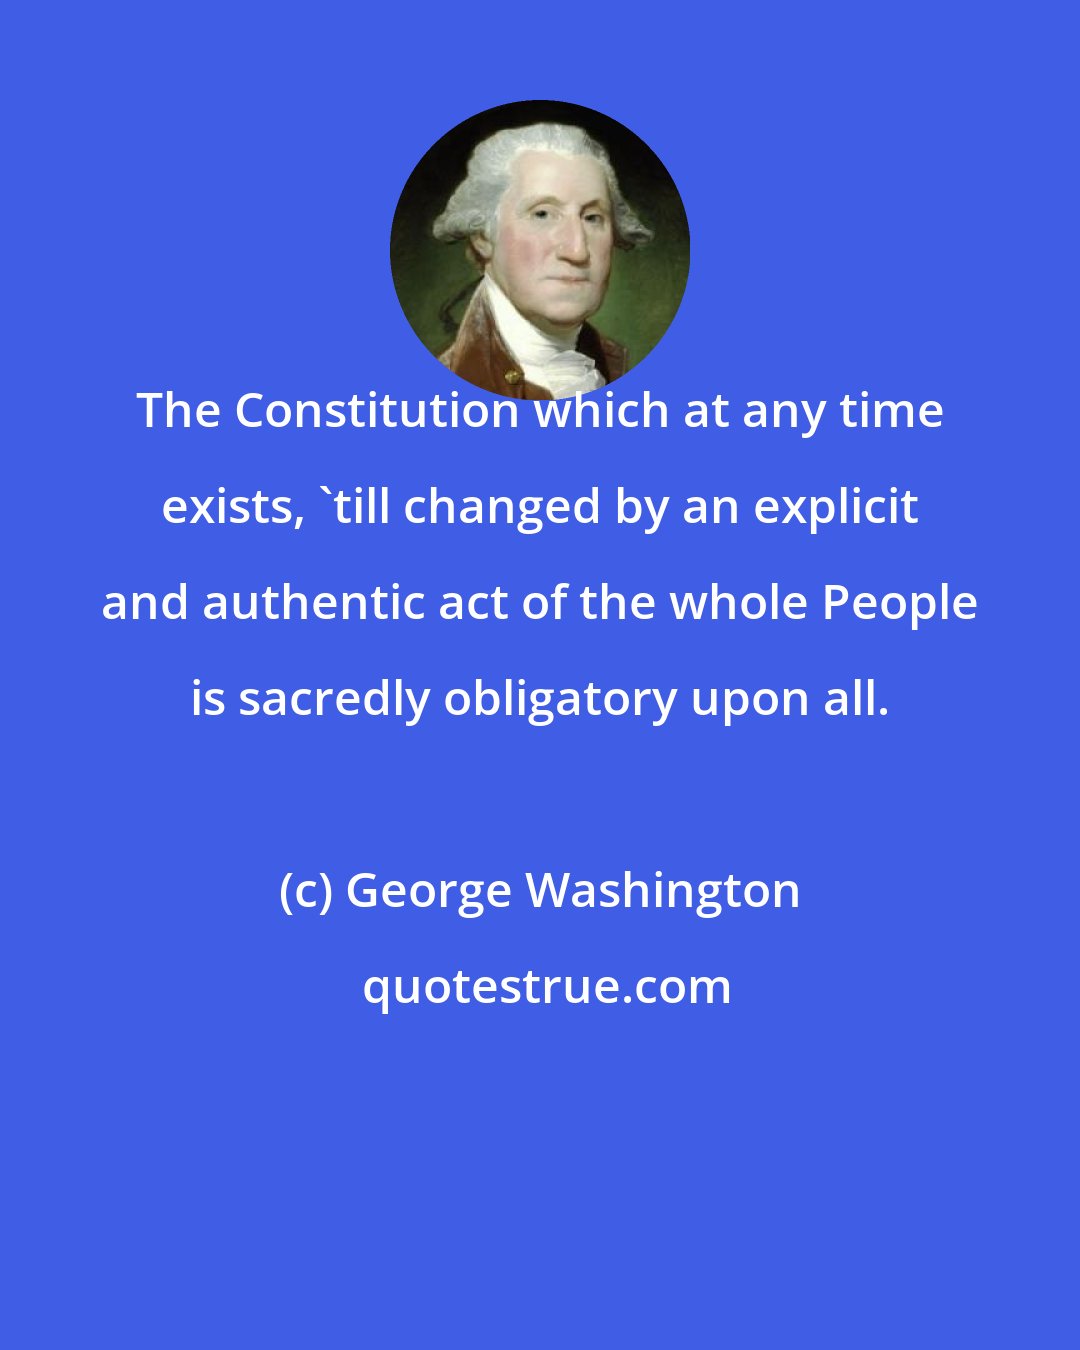 George Washington: The Constitution which at any time exists, 'till changed by an explicit and authentic act of the whole People is sacredly obligatory upon all.